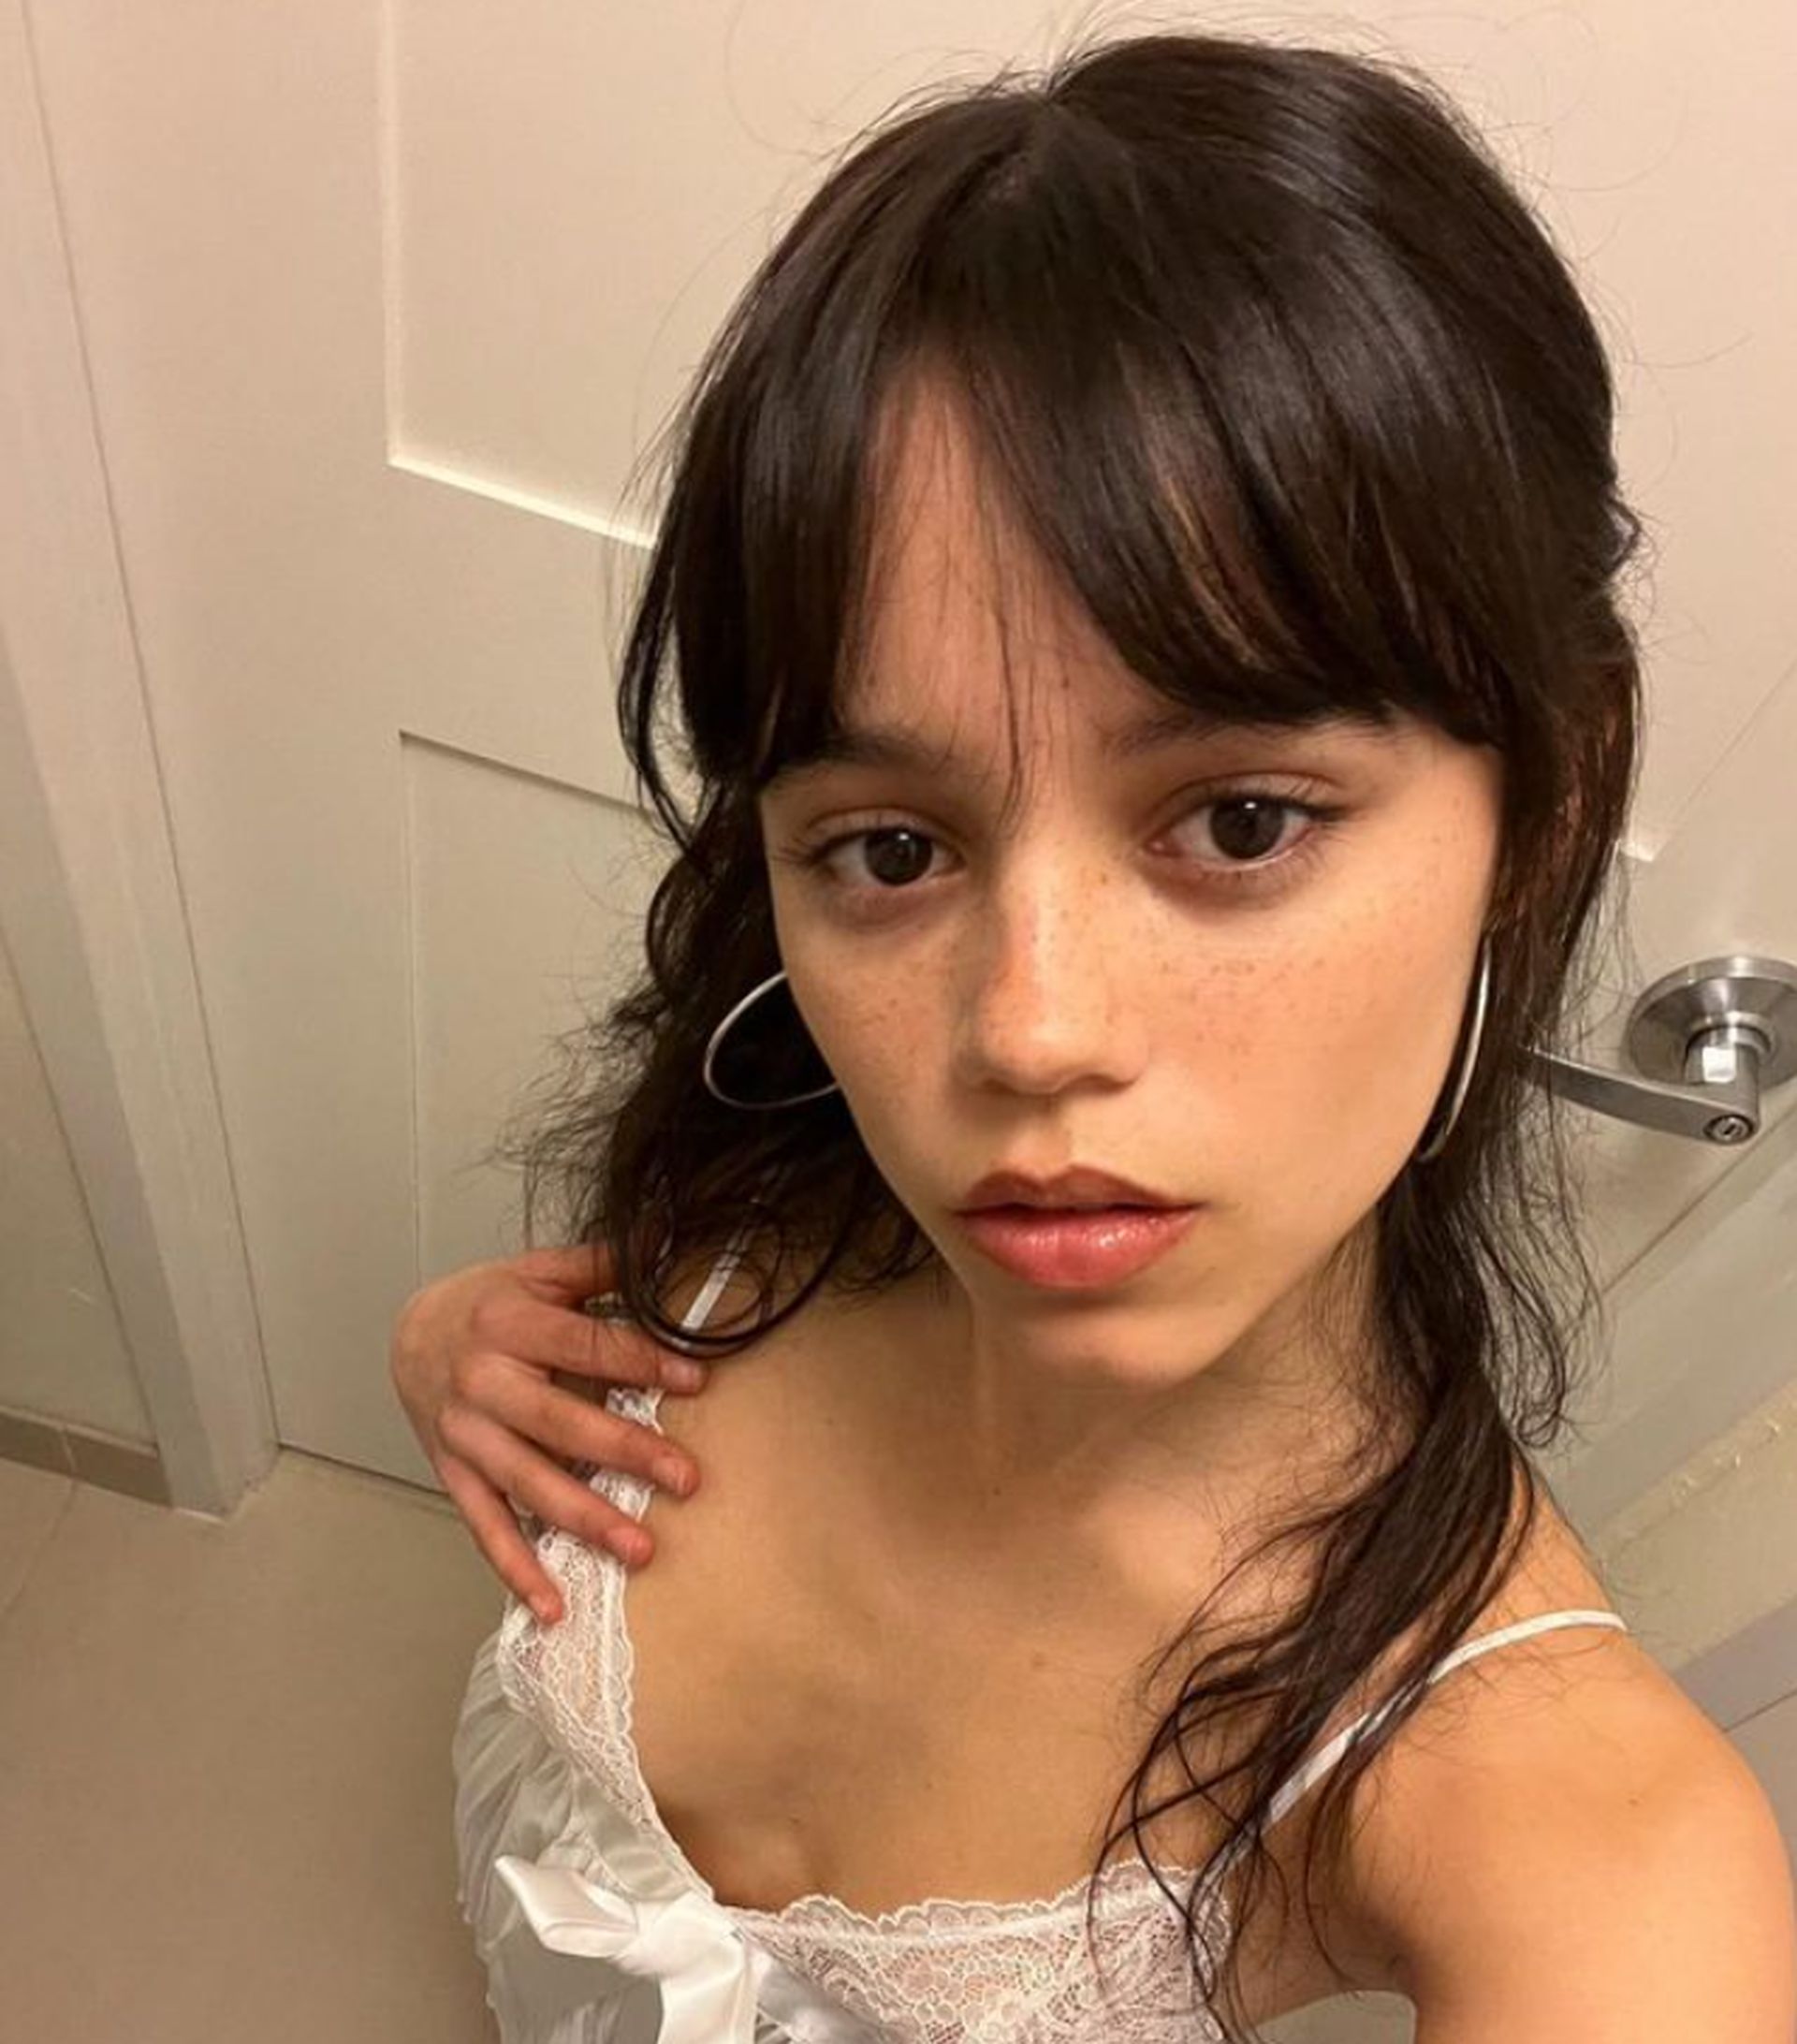 Today, we'll be going over the Jenna Ortega no makeup selfie that she shared over on Instagram. Since Wednesday's Netflix premiere, we've been obsessed with...